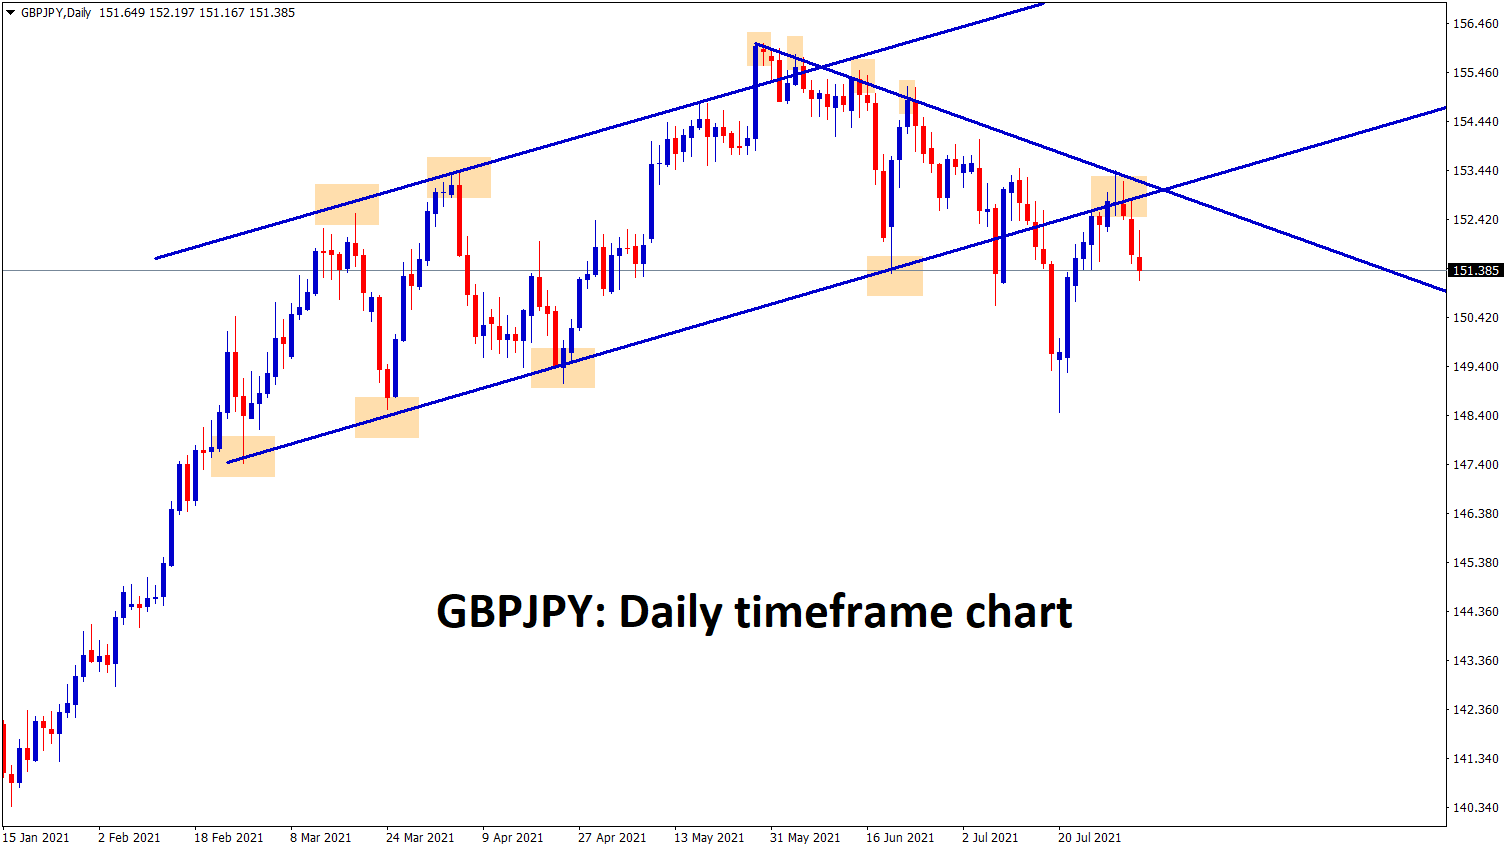 GBPJPY is falling after retesting the broken level and the lower high zone of the downtrend line